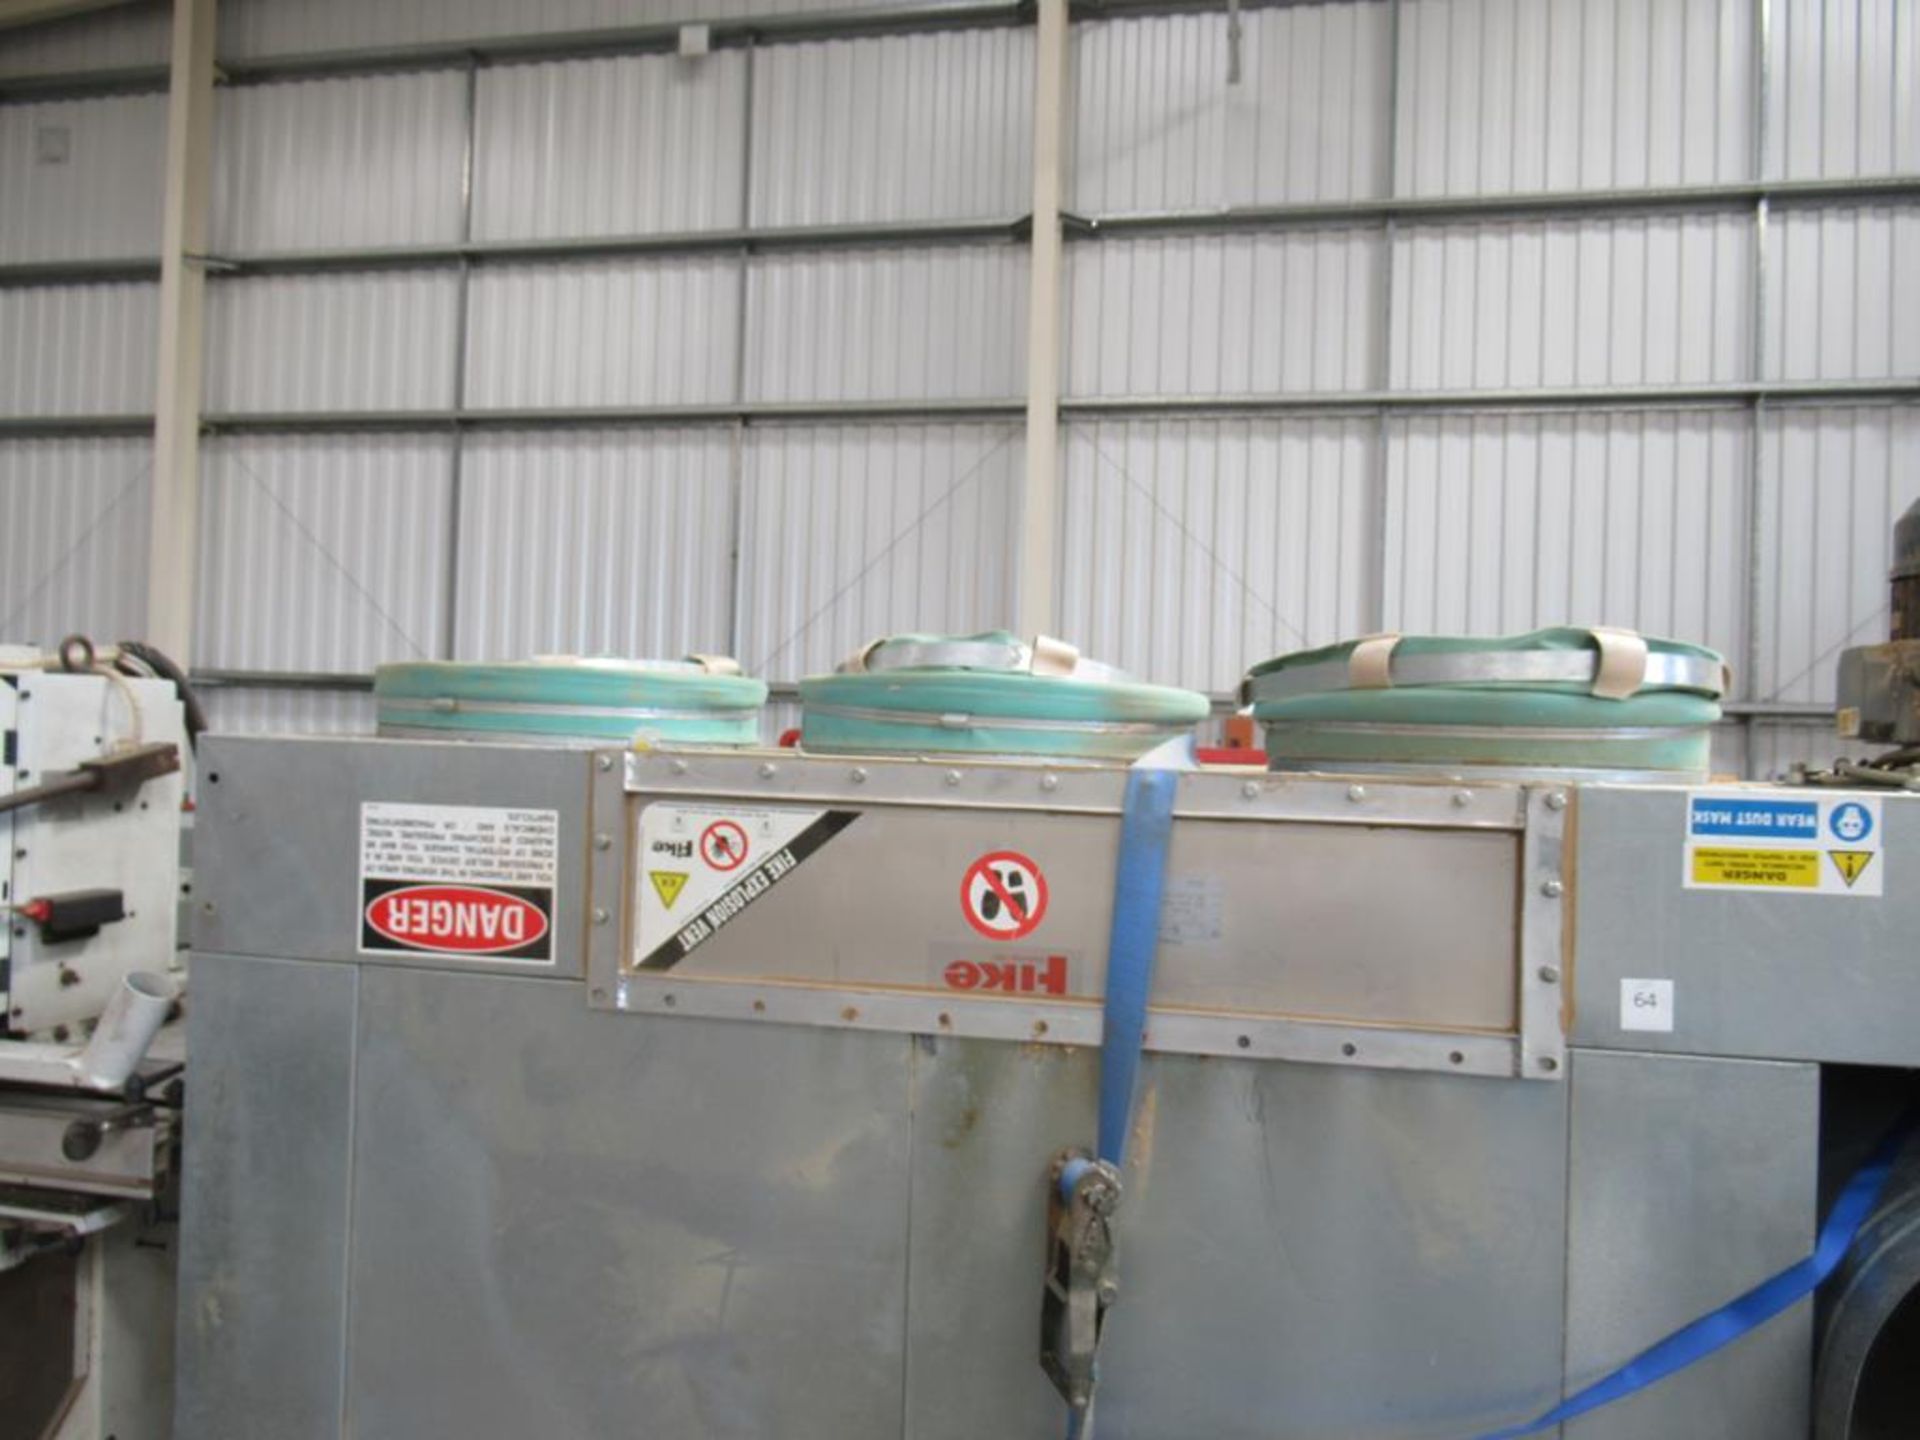 3 bag multi filter dust unit with file cv explosion panel and bins - Image 3 of 4